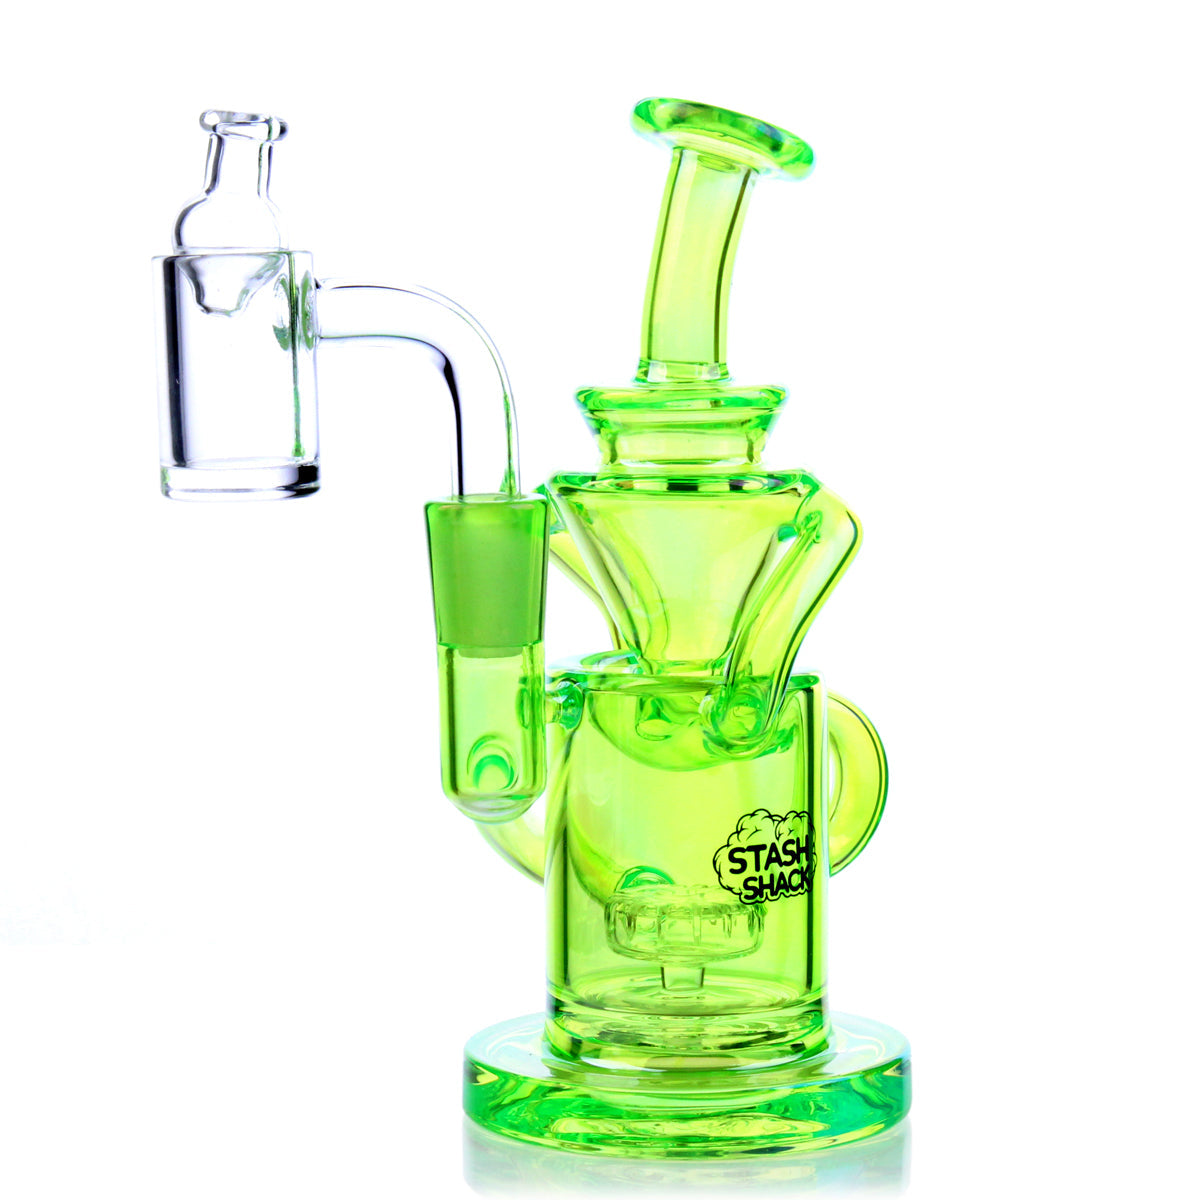 Desert Rose Mini Rig in vibrant green, compact 5.5" with showerhead percolator, 90-degree joint, front view